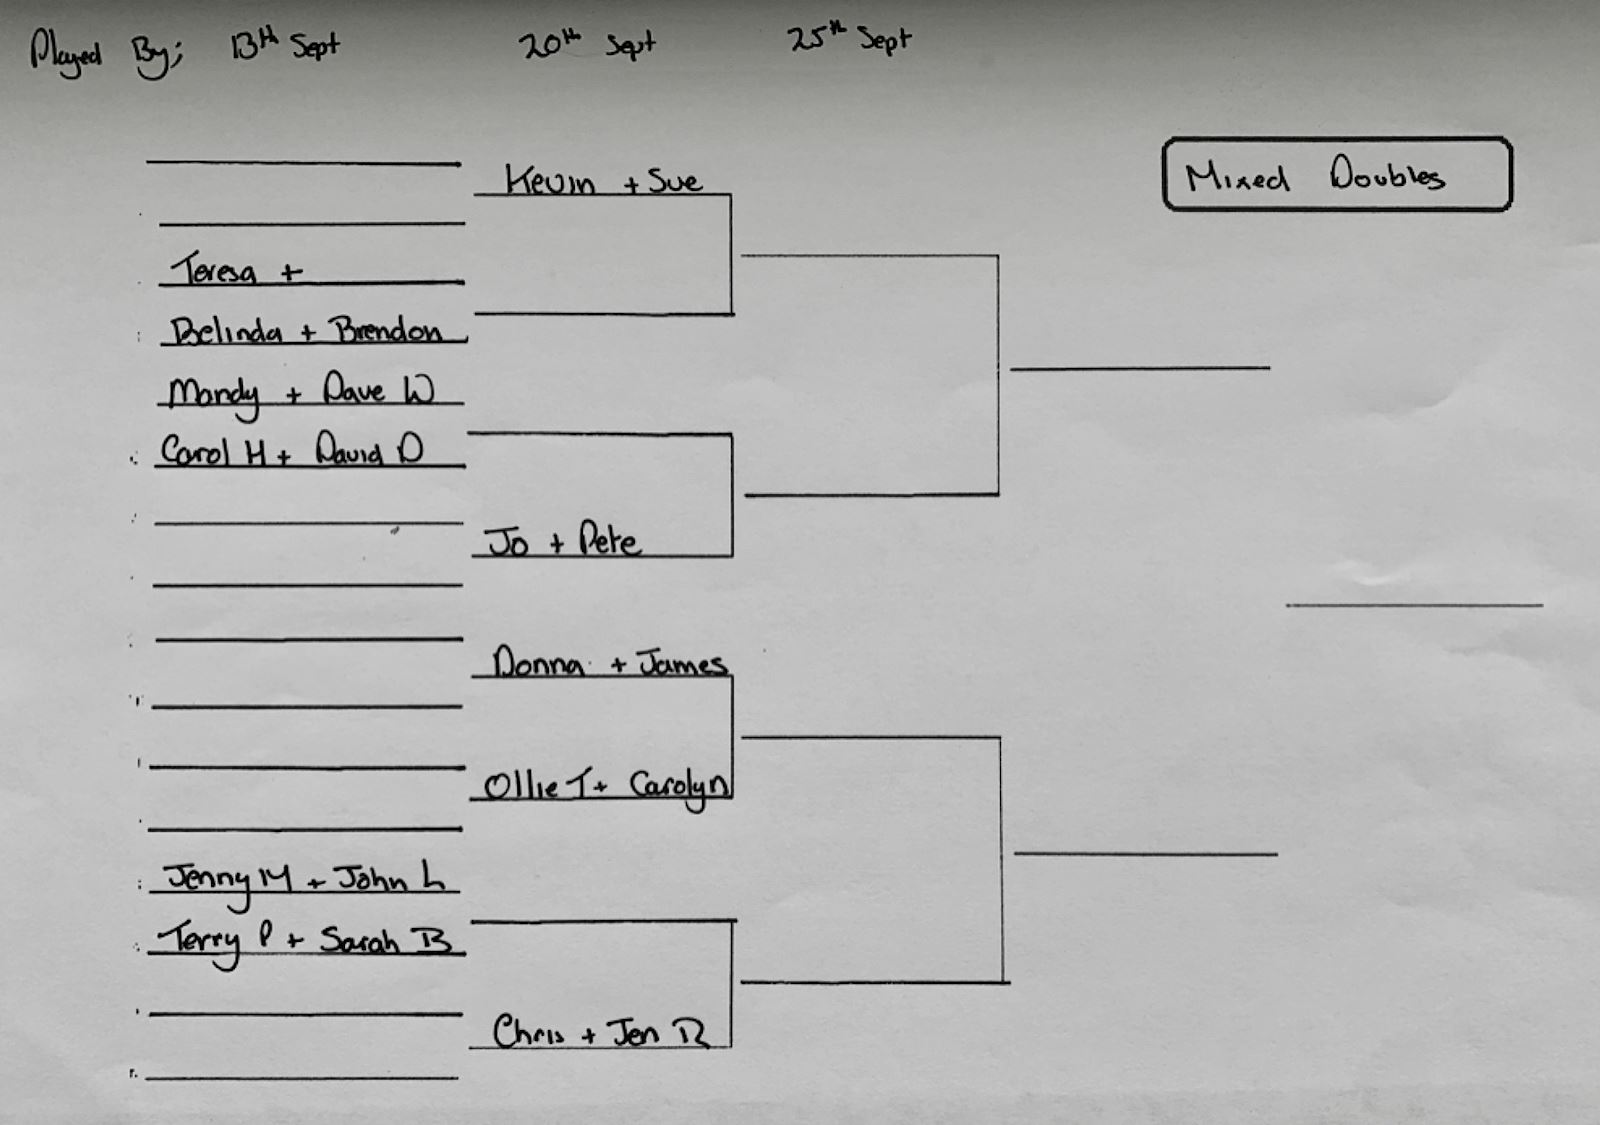 Mixed Doubles Draw